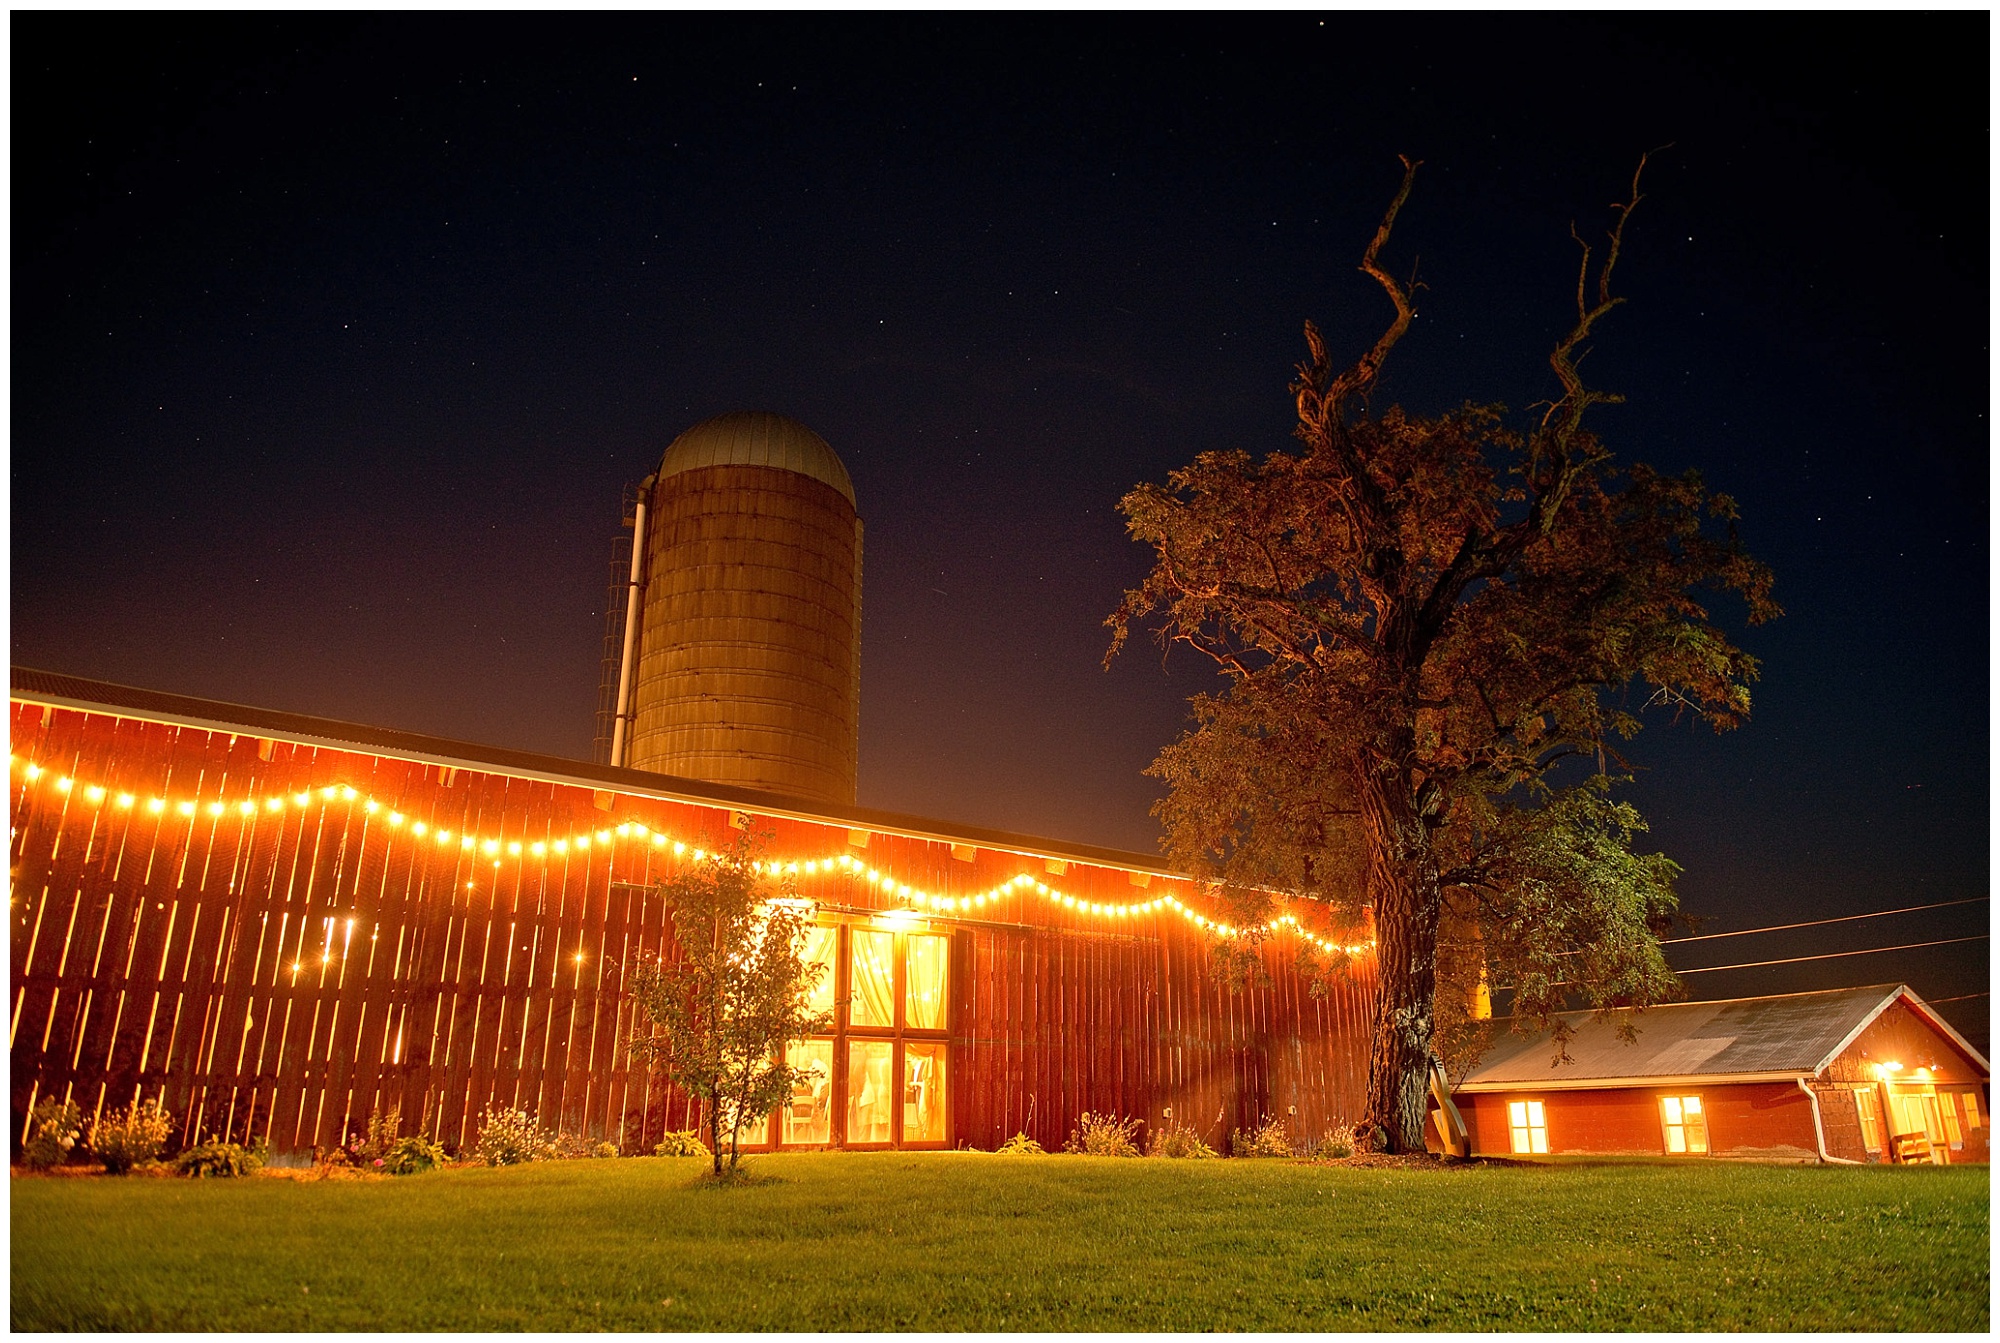 Photo of barn reception from exterior at nighttime lighted up beautifully.